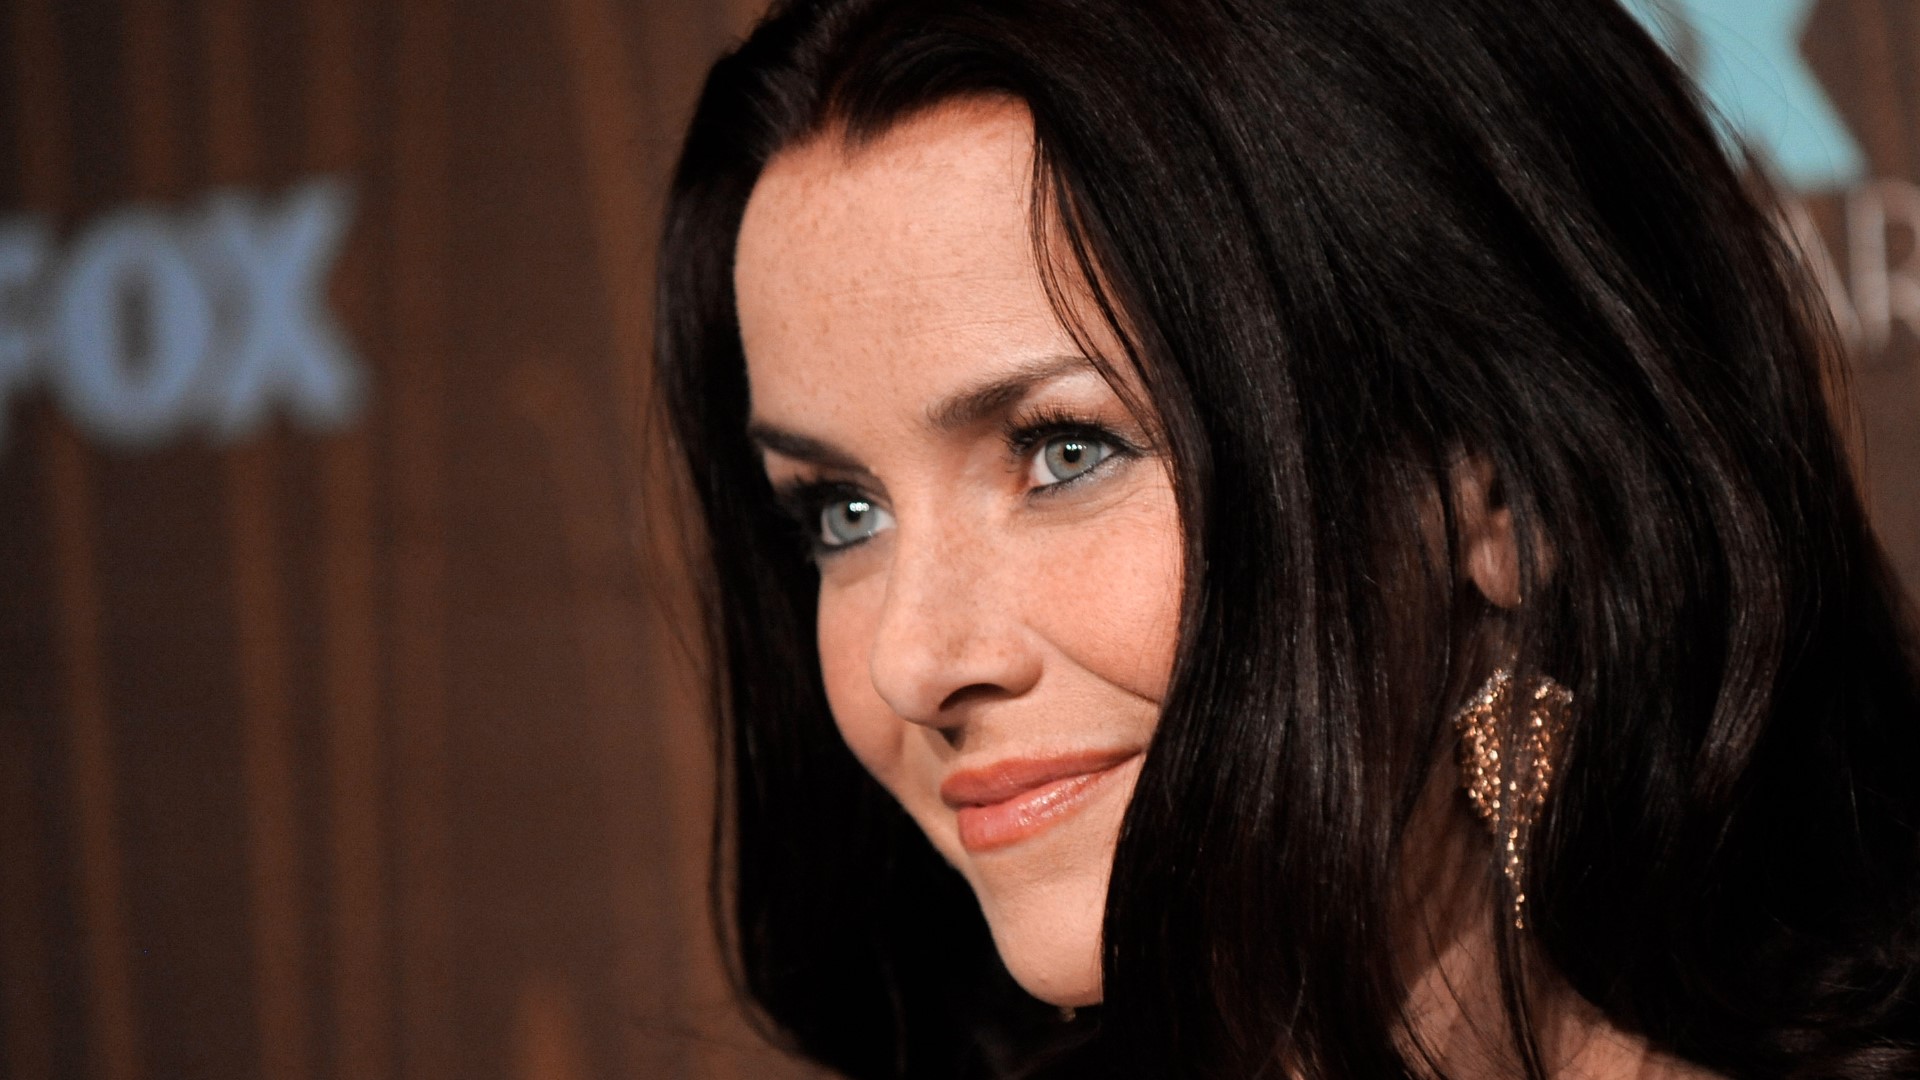 Wersching passed away Sunday morning in Los Angeles following a battle with cancer, her publicist told The Associated Press. She was a St. Louis native.